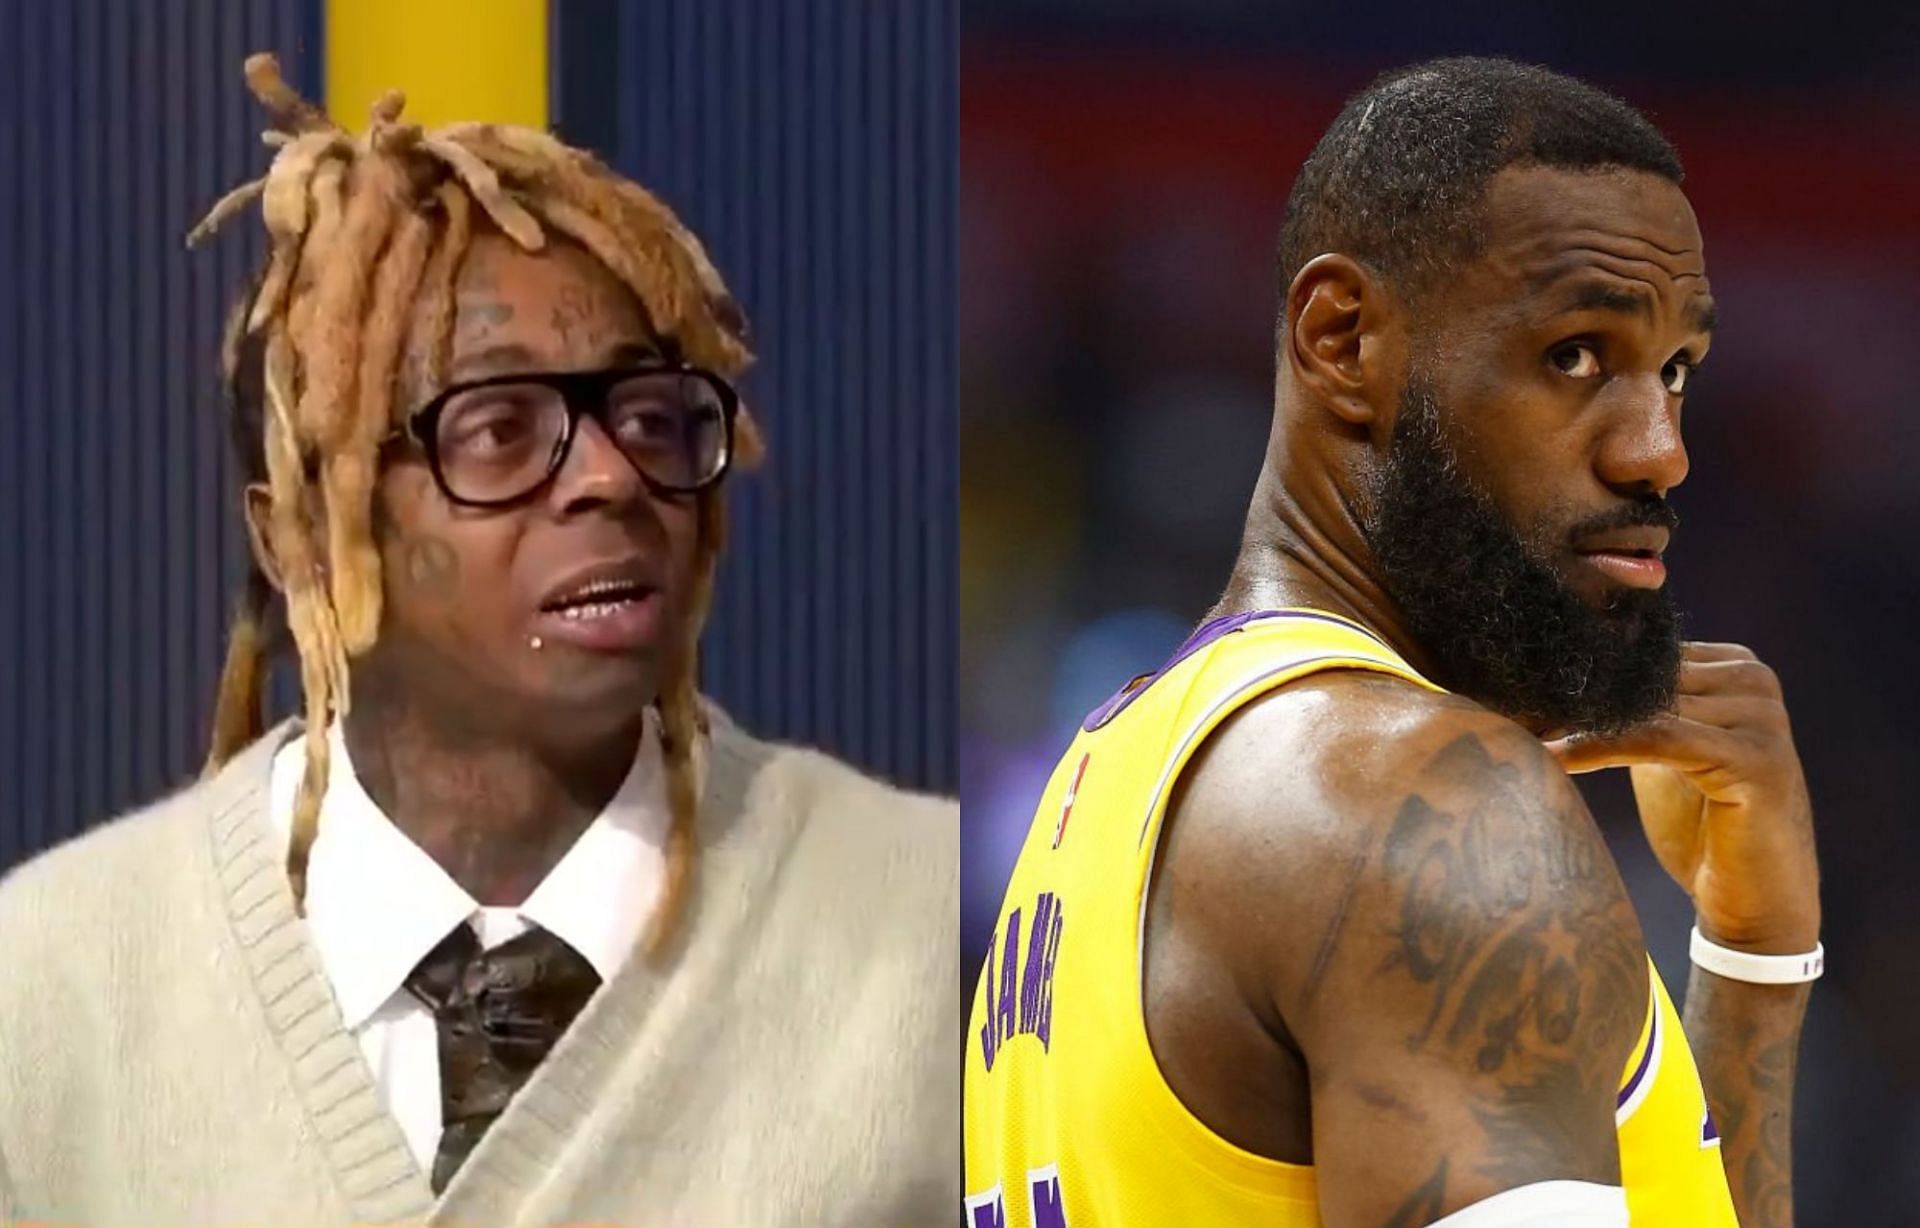 Lil Wayne tells Skip Bayless that LeBron James could have prevented the incident from happening